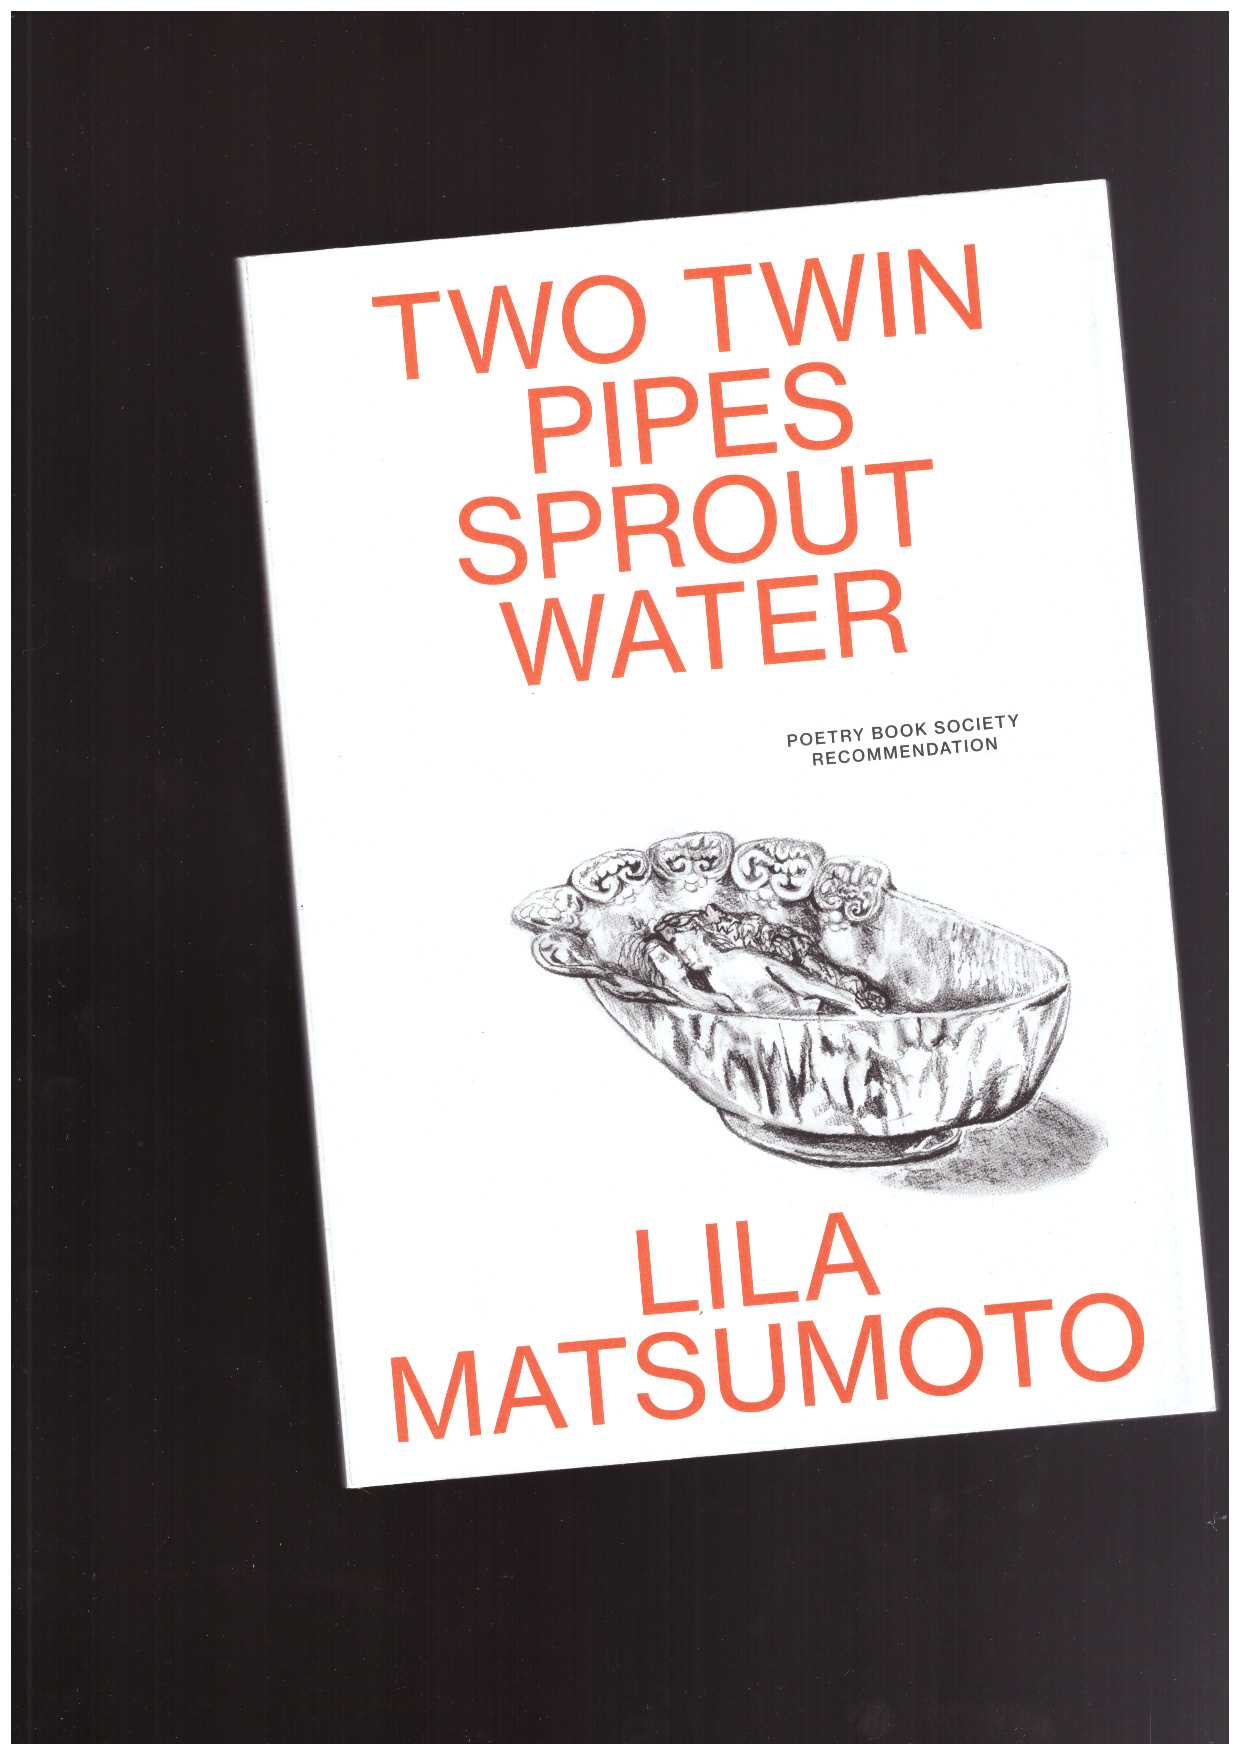 MATSUMOTO, Lila  - Two Twin Pipes Sprout Water